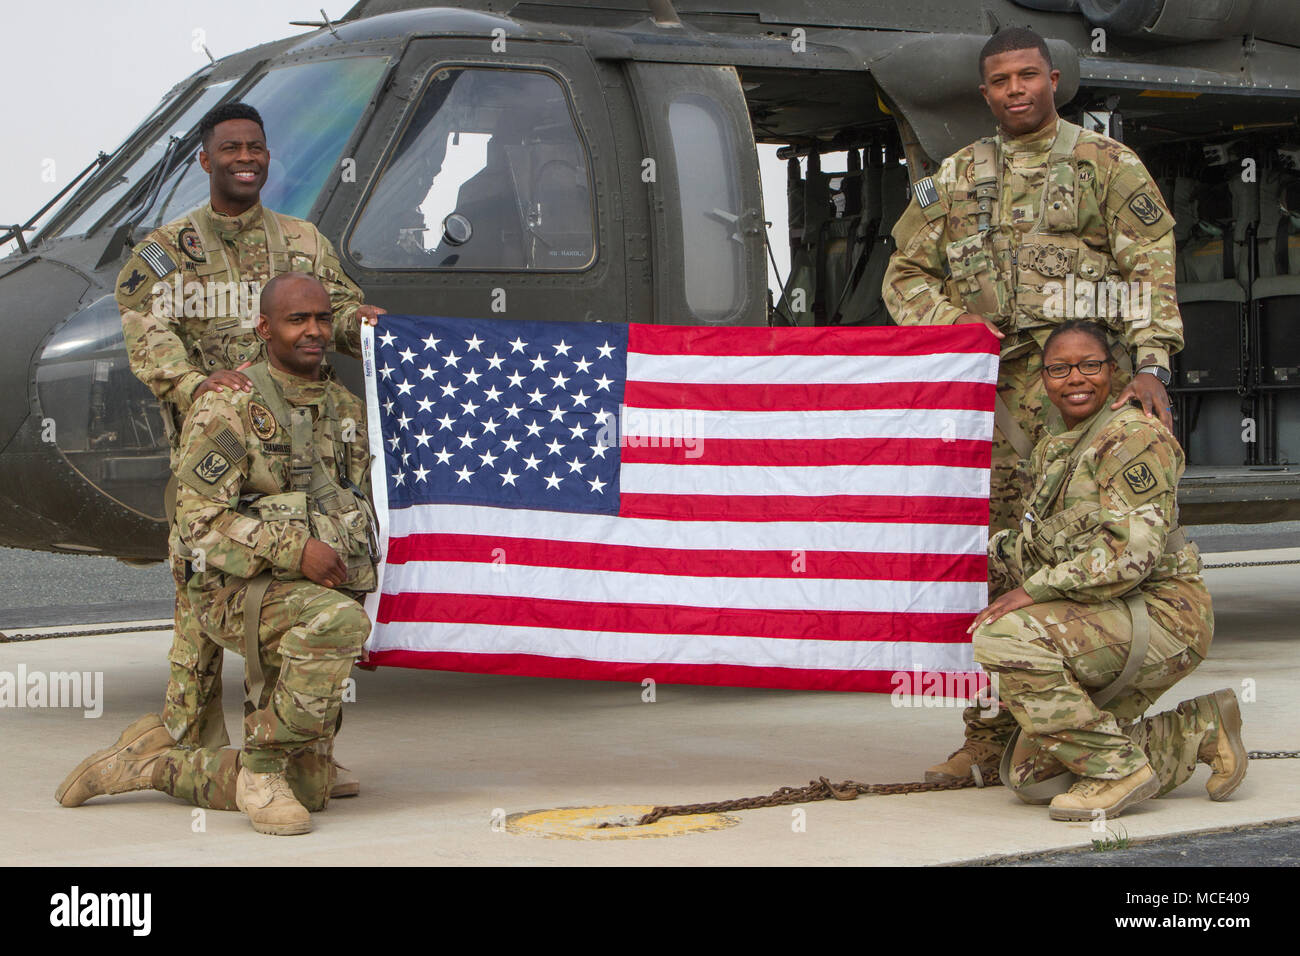 Captain Echette Washington, Chief Warrant Officer 3 Troy Willis, Sgt. John Chambliss, and Staff Sgt. Jackie Edwards from Alpha Company, “Task Force Voodoo”, 1st Assault Helicopter Battalion, 244th Aviation Regiment, Louisiana National Guard pose on the flight line, Camp Buehring, Kuwait, Feb. 27, 2018. The flight featured an all-African-American crew in recognition of Black History Month and the growth that has occurred within the aviation community over time. (U.S. Army photo by Sgt. Thomas X. Crough, USARCENT PAO) Stock Photo